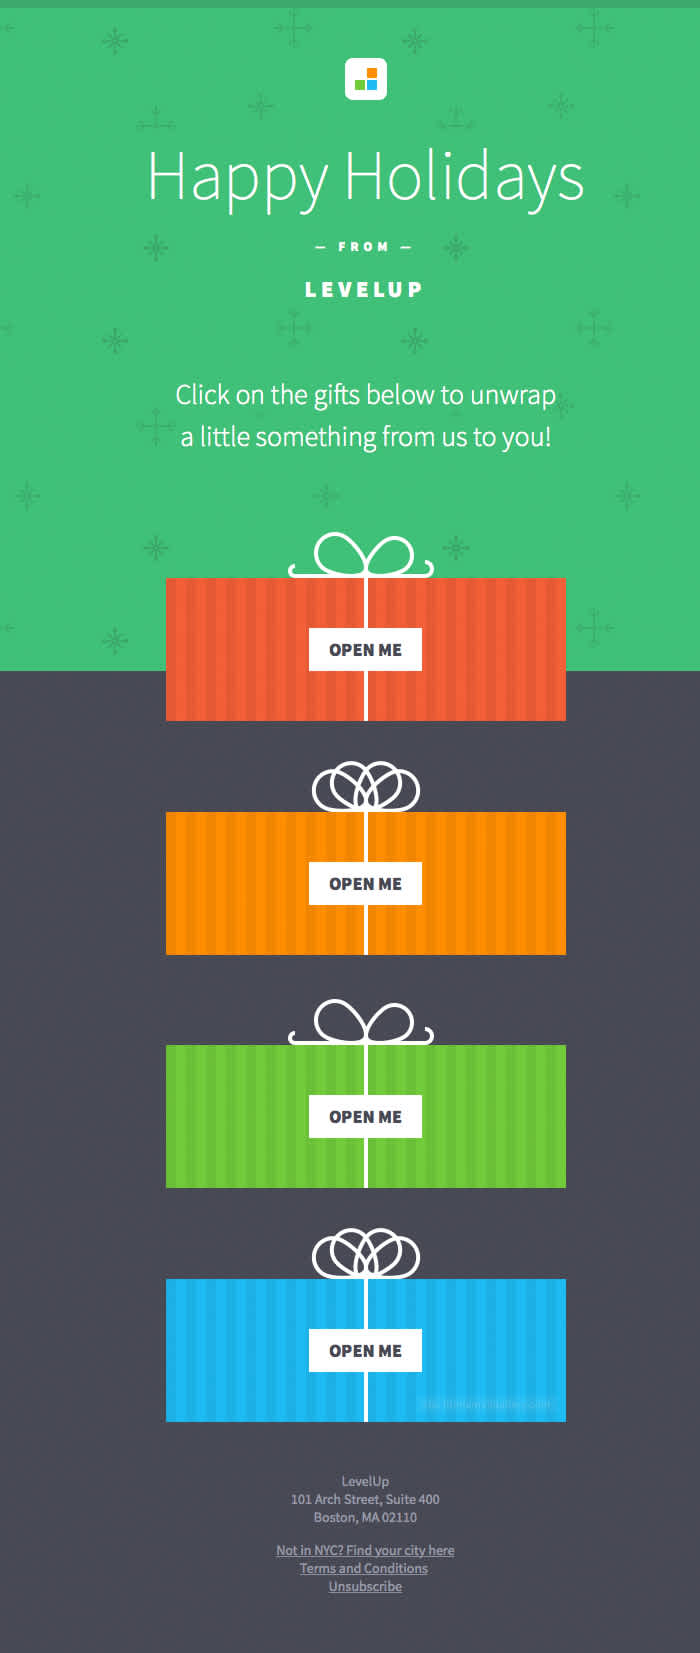 Mobile ordering provider LevelUp’s interactive Christmas newsletter